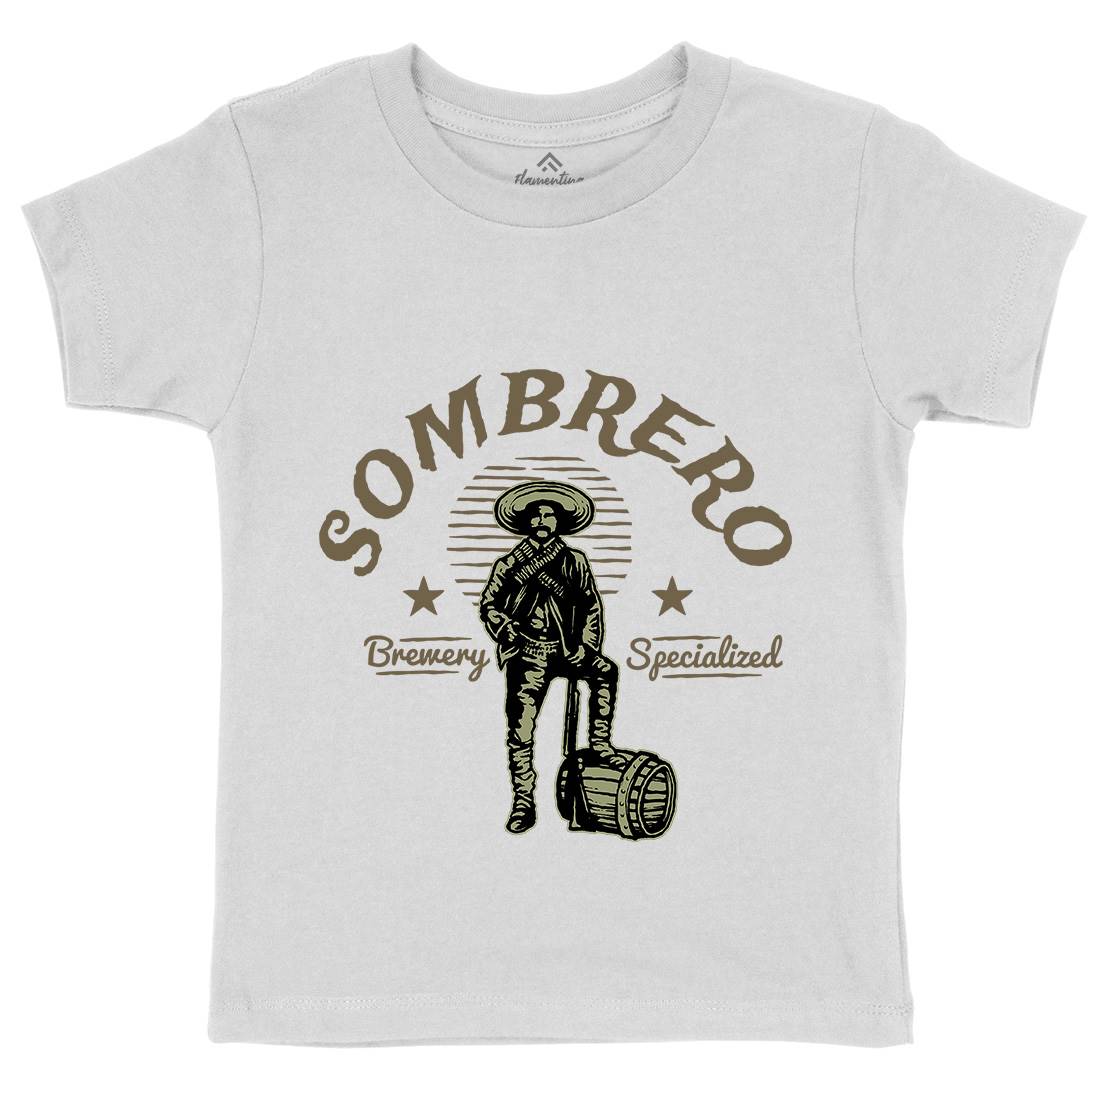 Sombrero Brewery Kids Crew Neck T-Shirt American A369